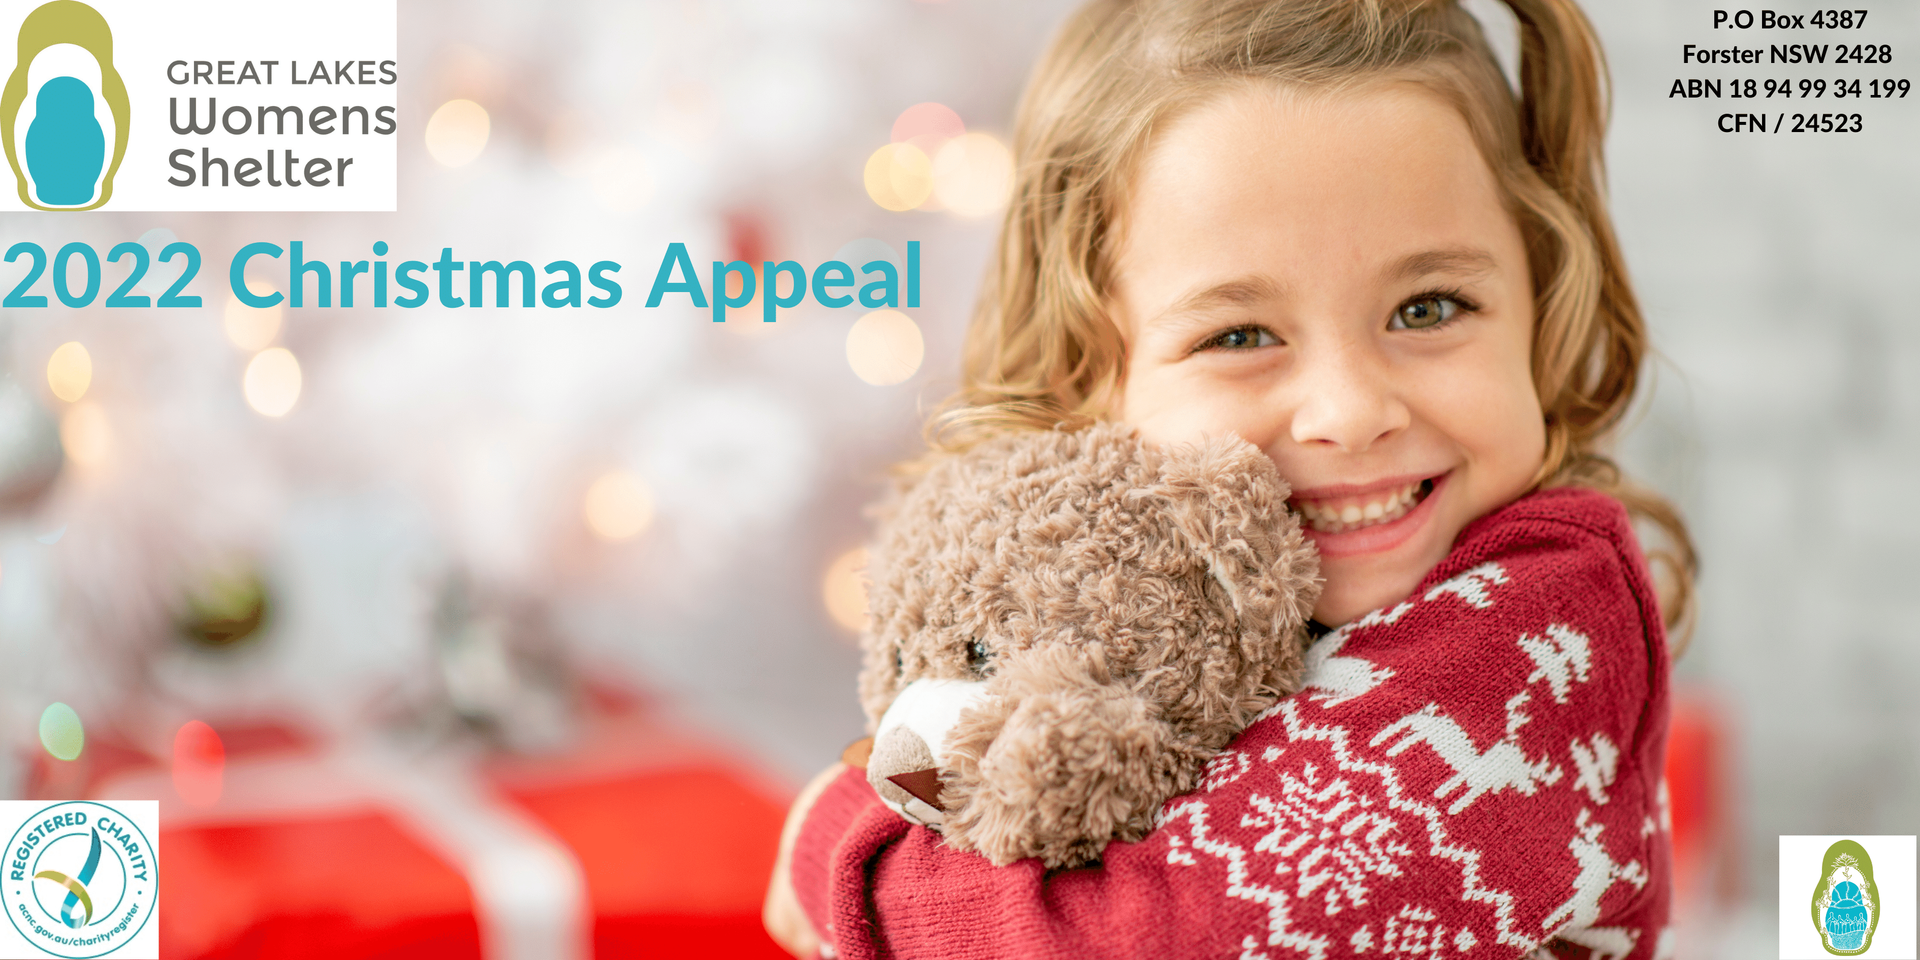 Great Lakes Christmas Appeal 2022